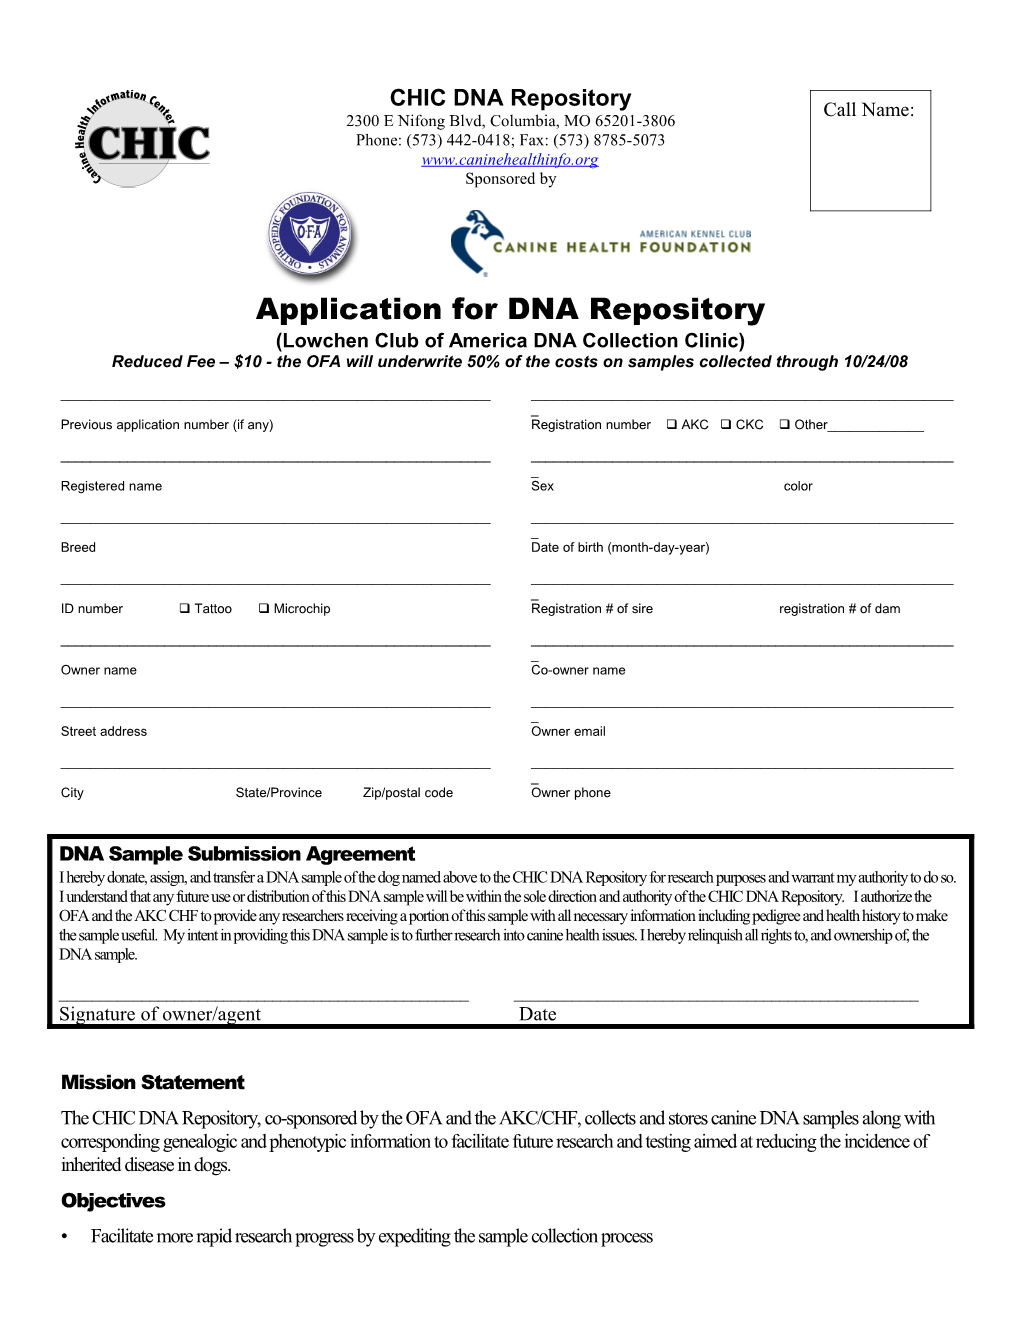 CHIC DNA Bank Submission Form